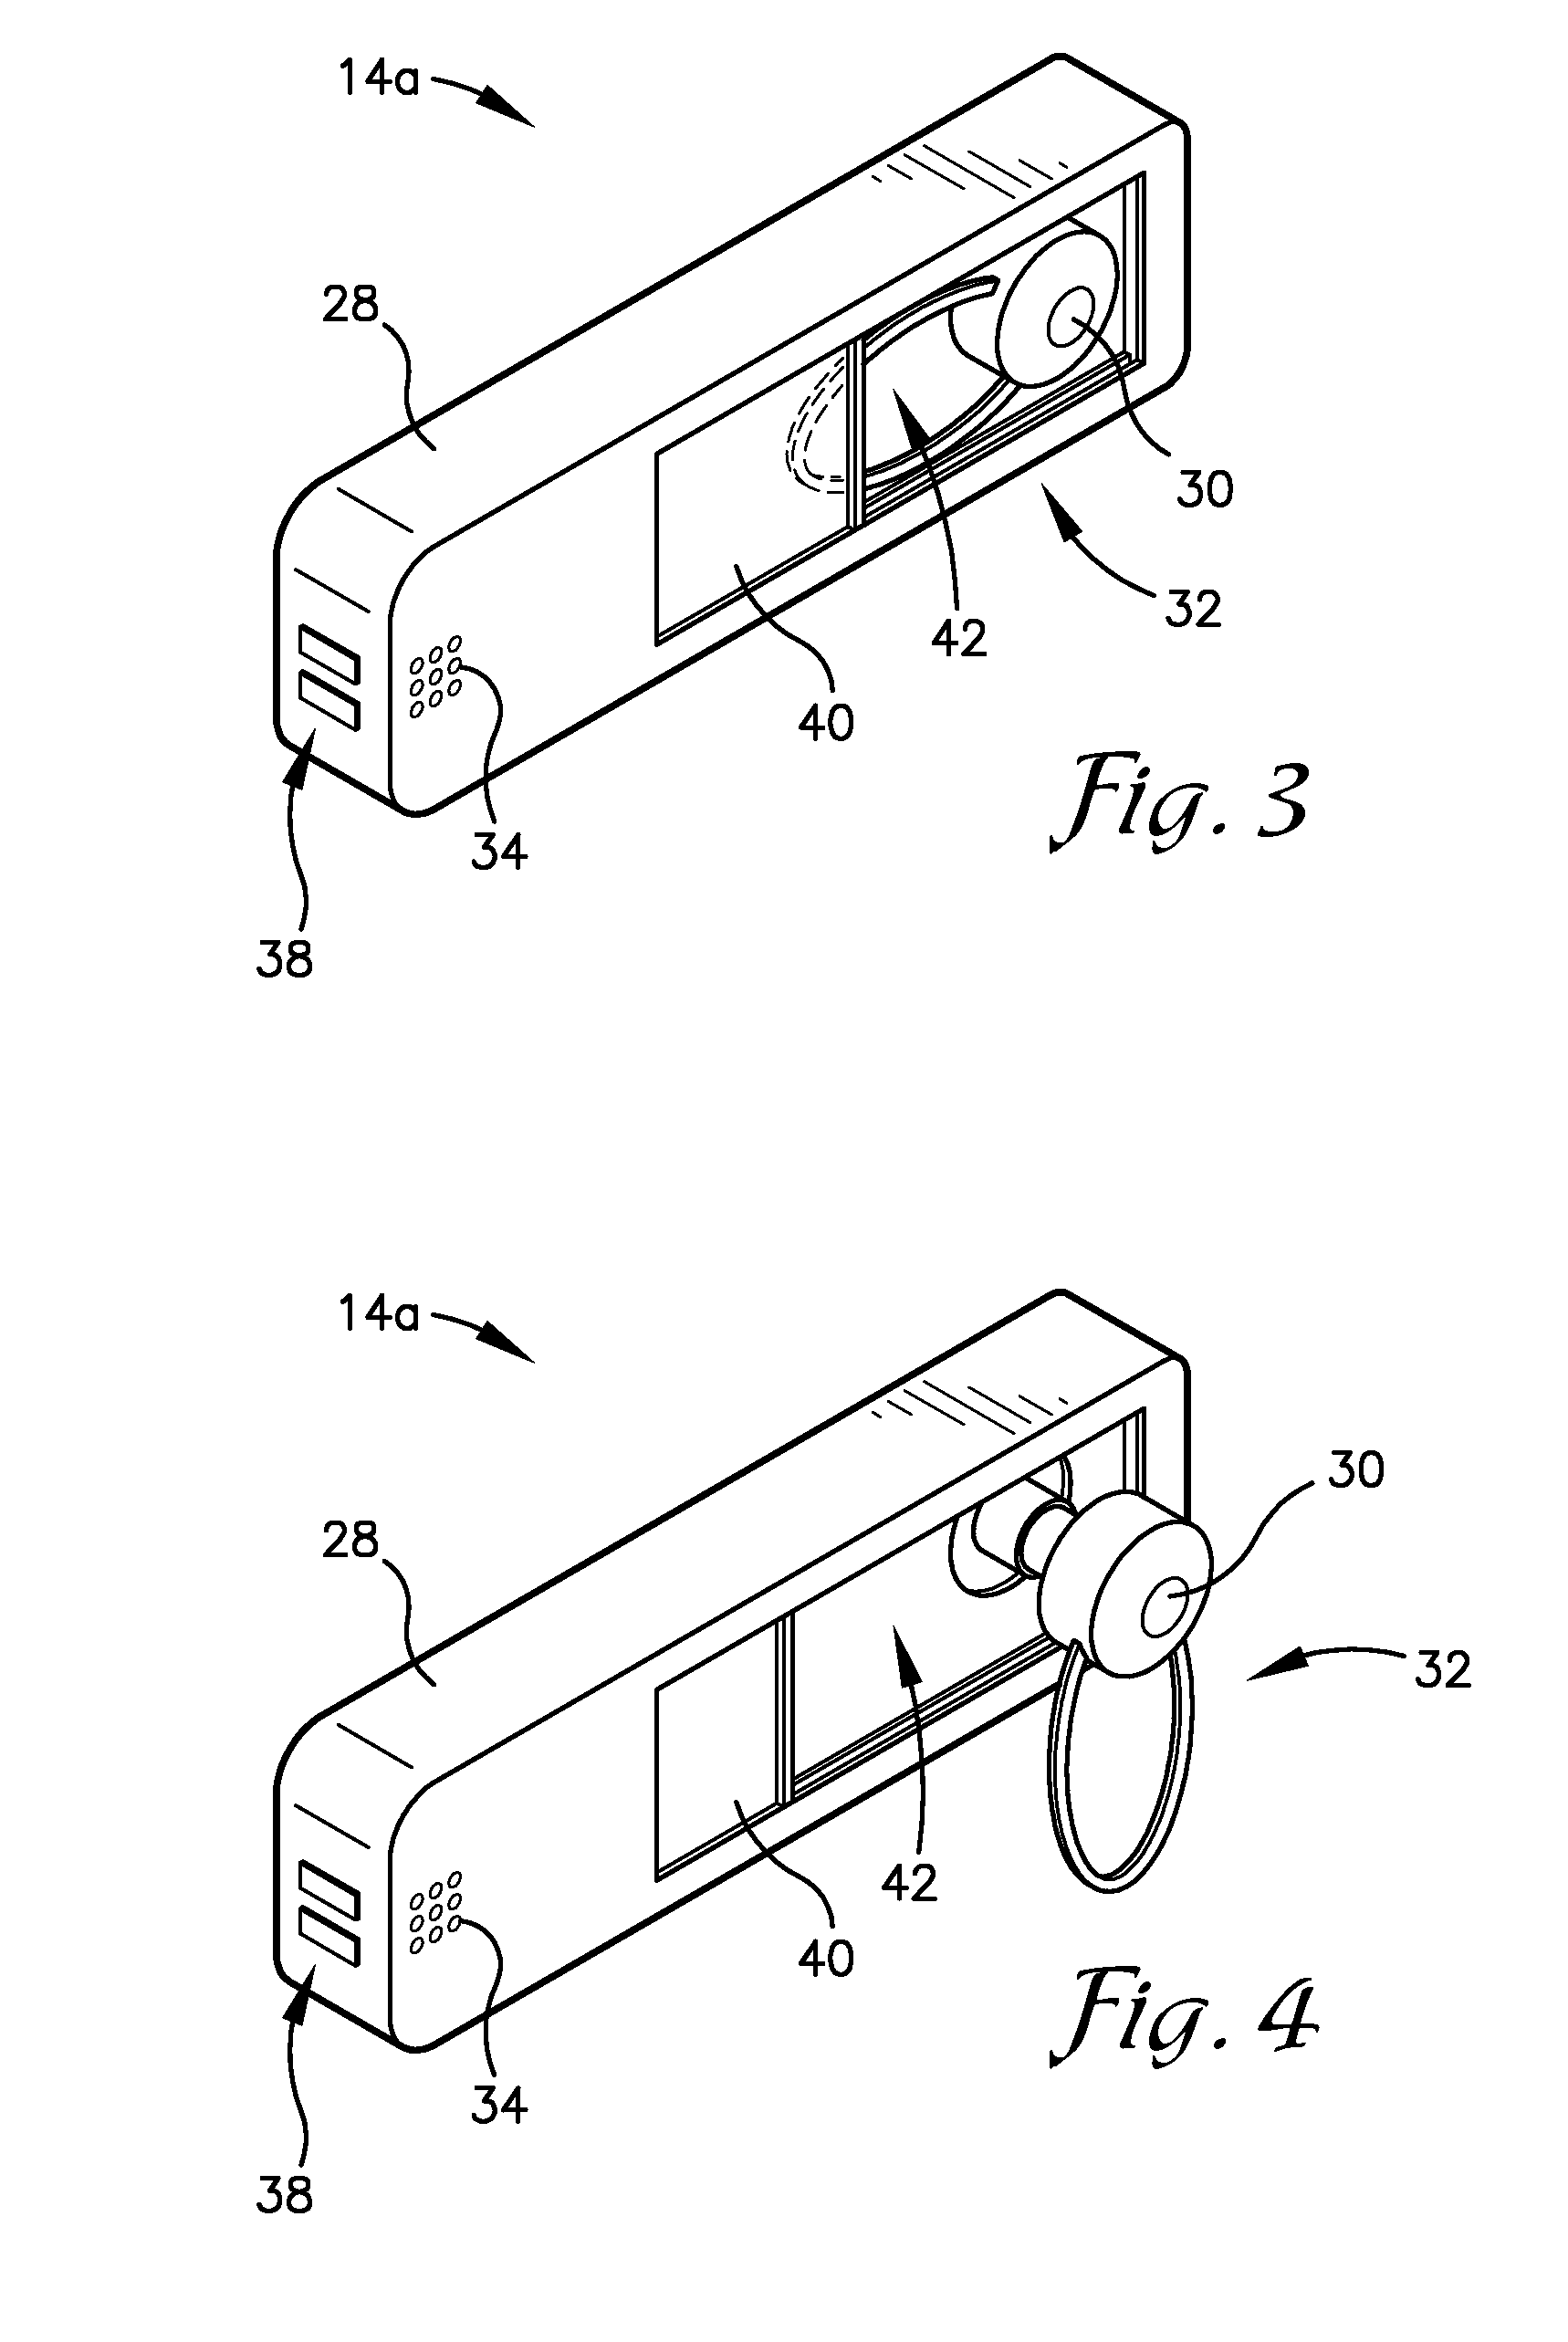 Integrated wireless headset system for electronic devices